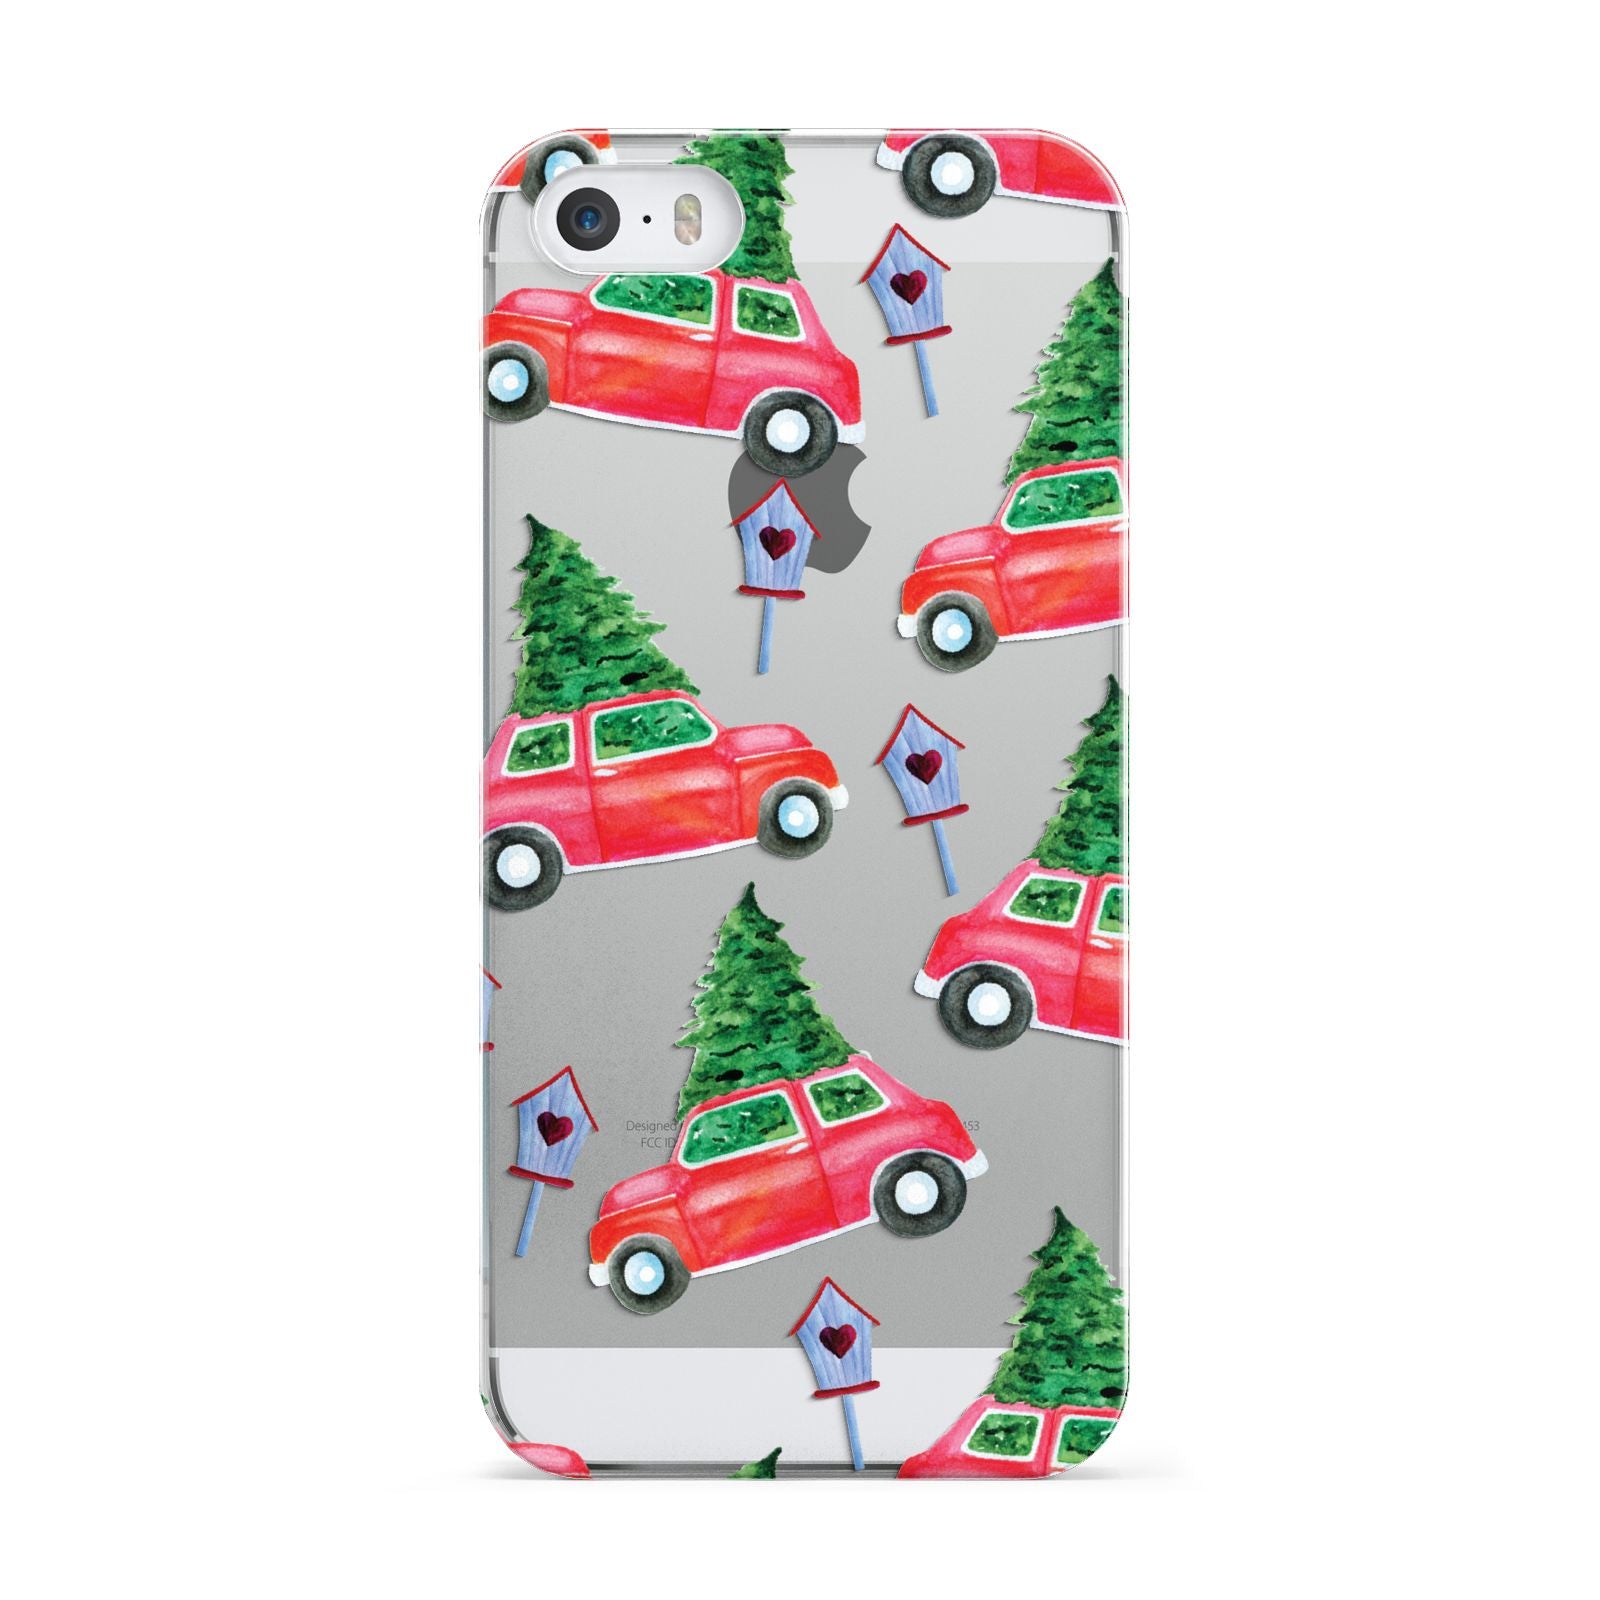 Driving home for Christmas Apple iPhone 5 Case